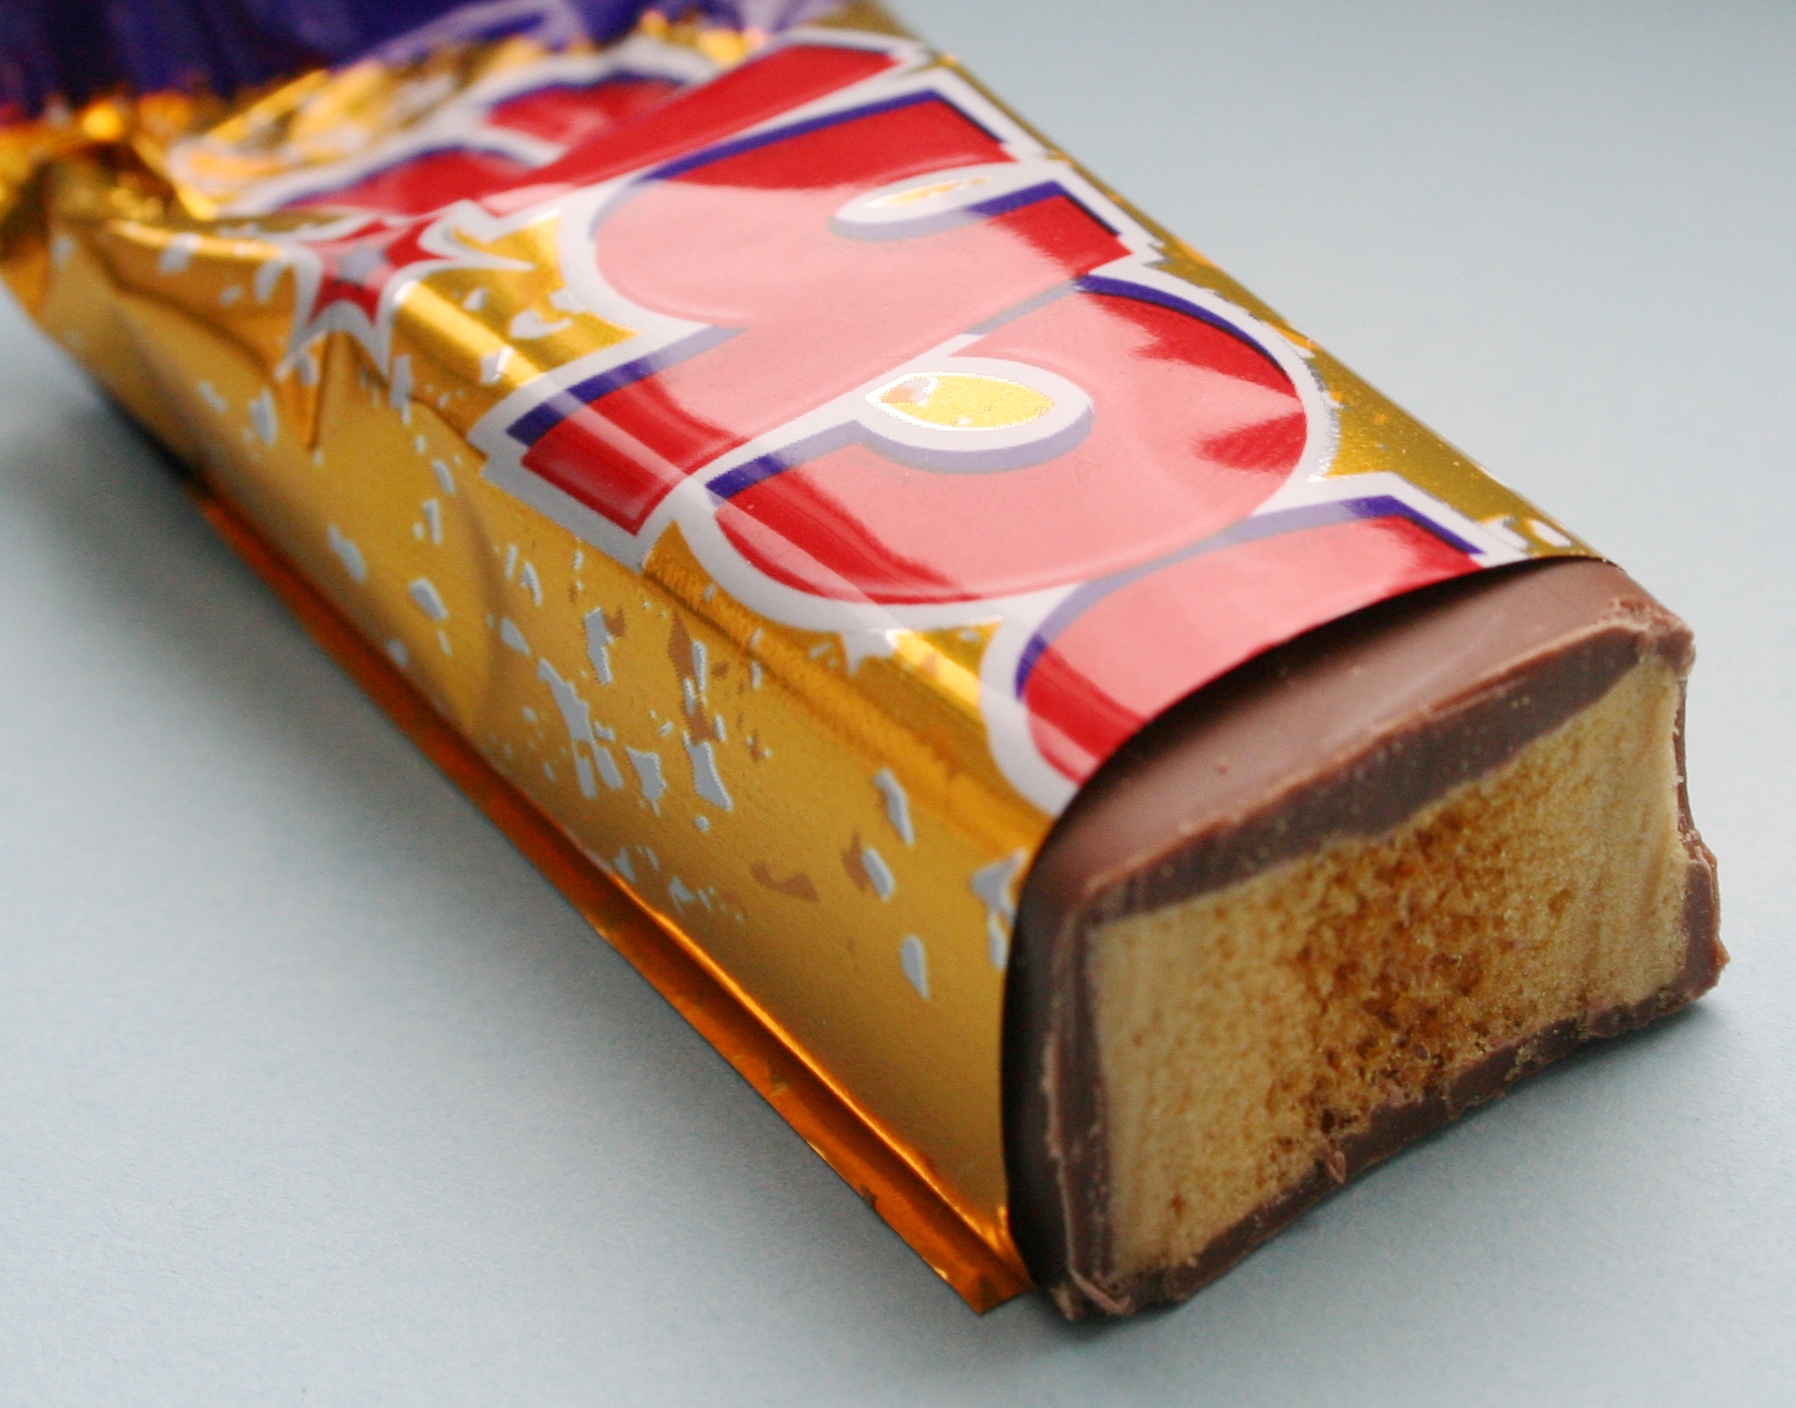 A crunchie bar with the centre exposed.